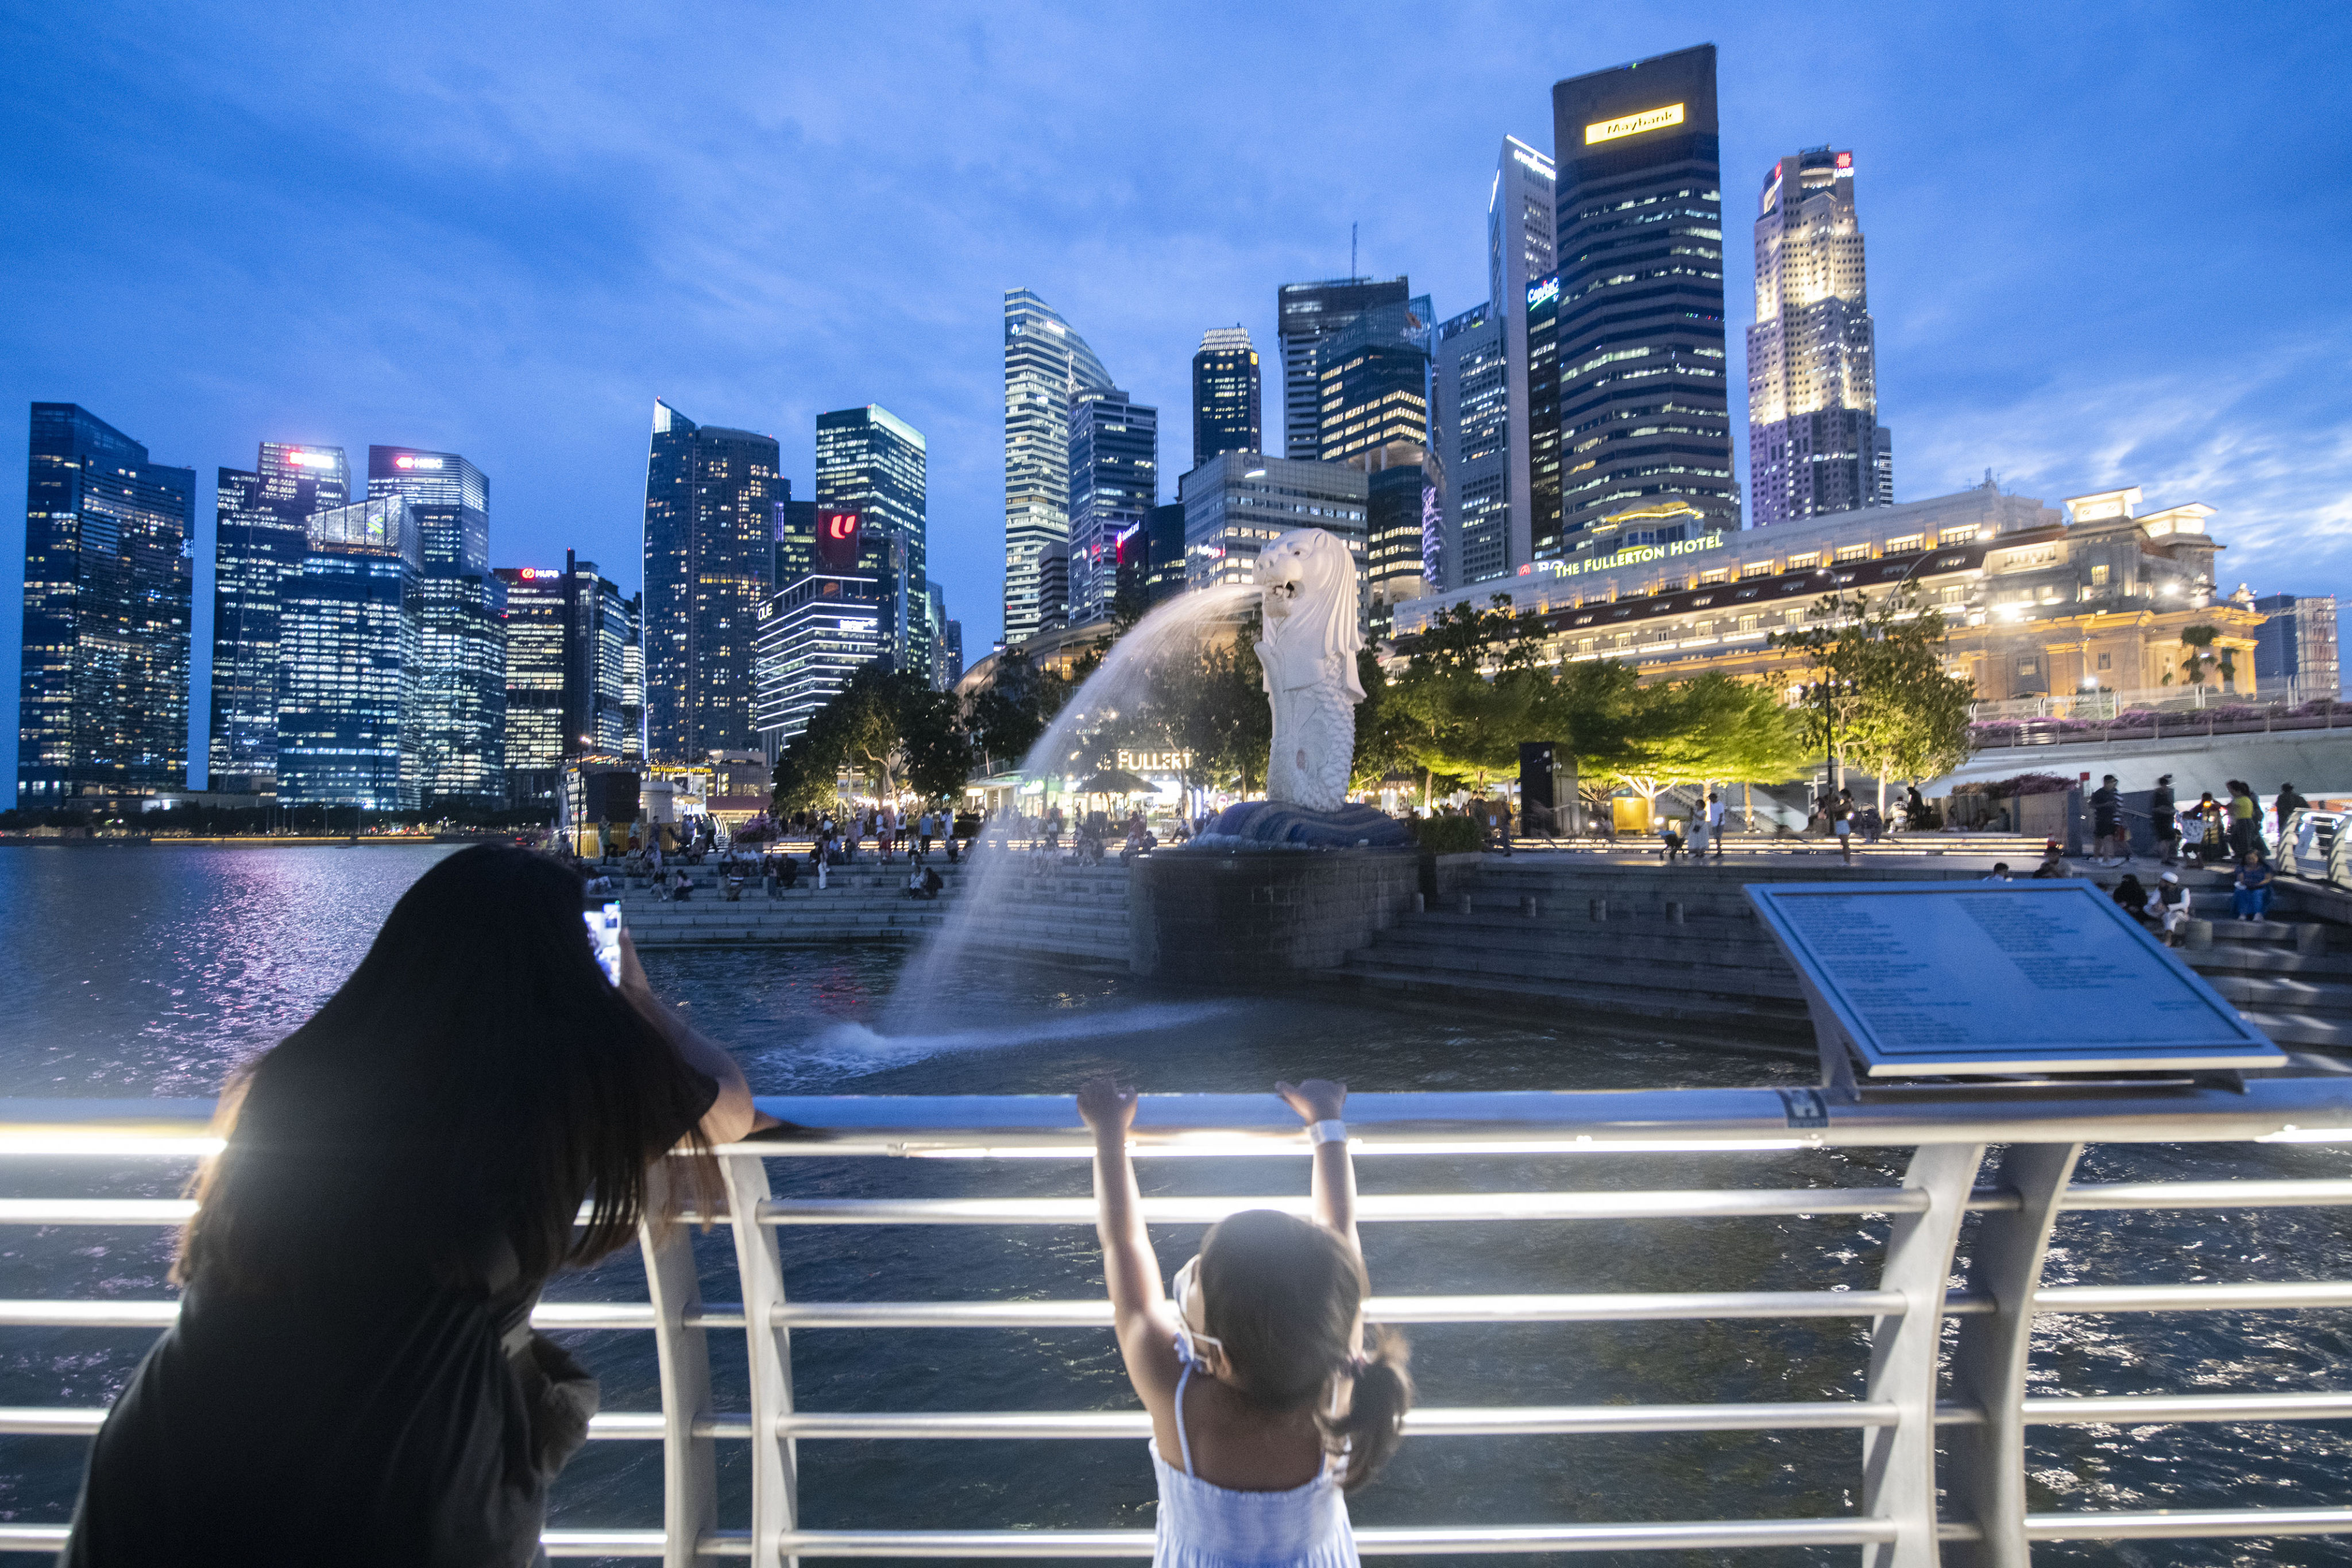 Tourists take pictures of the iconic Merlion statue in Singapore earlier this month. Photo: Xinhua